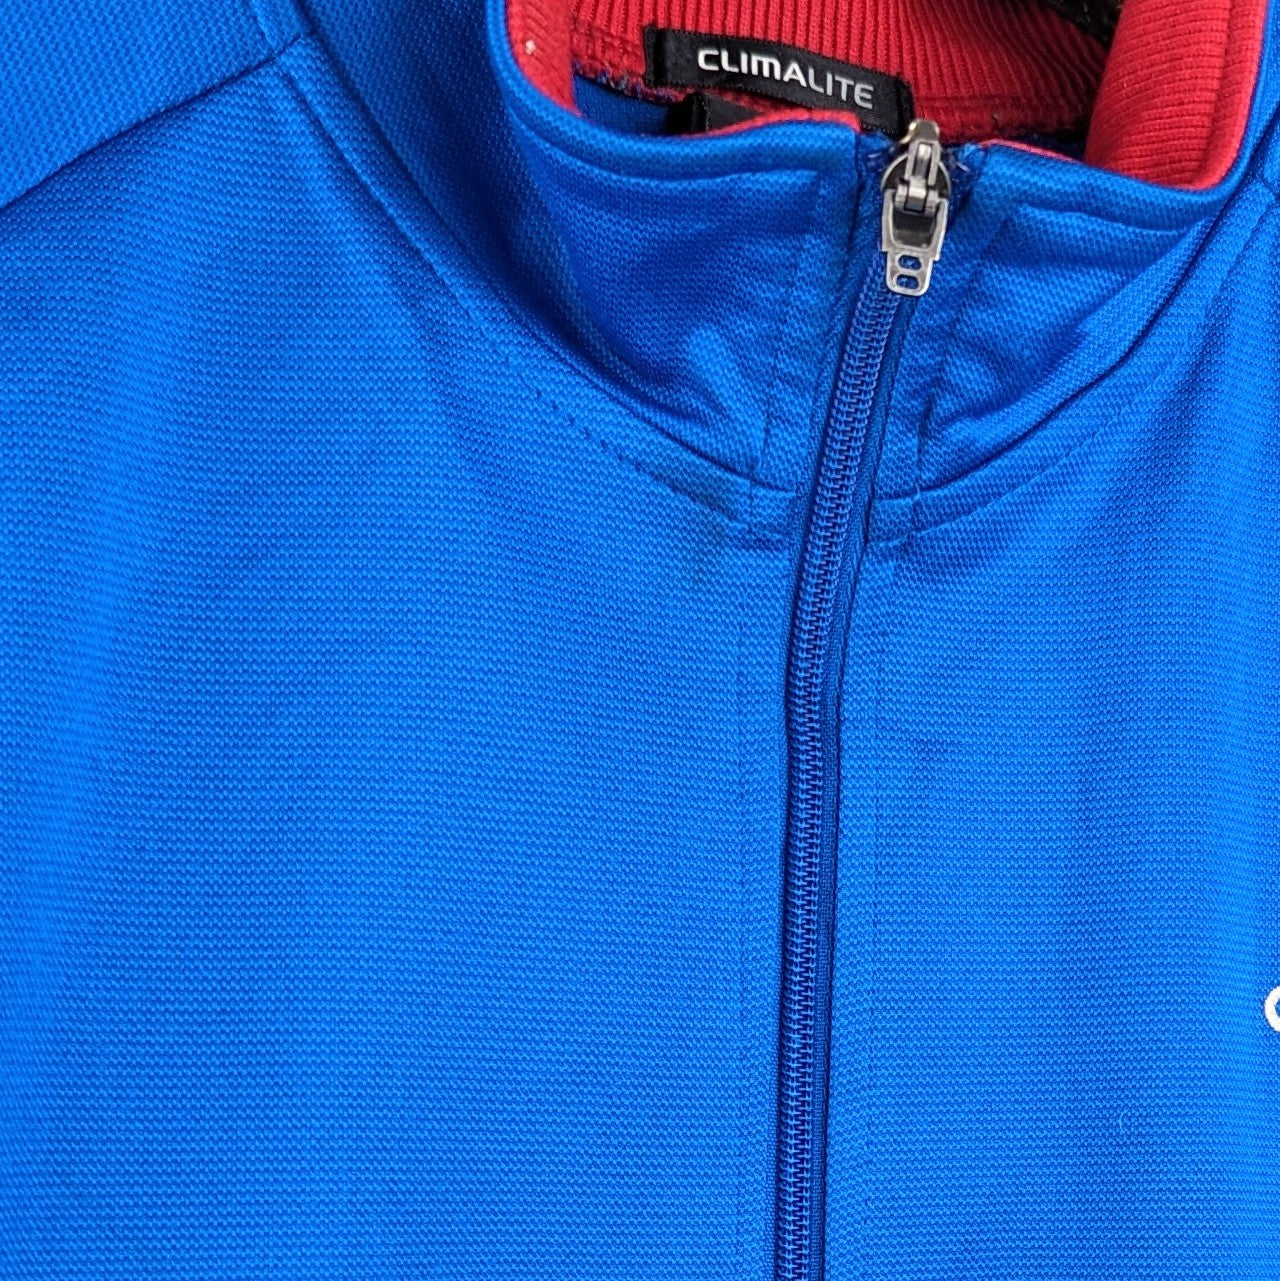 ADIDAS CLIMALITE TRACKJACKET BLUE AND RED (S)